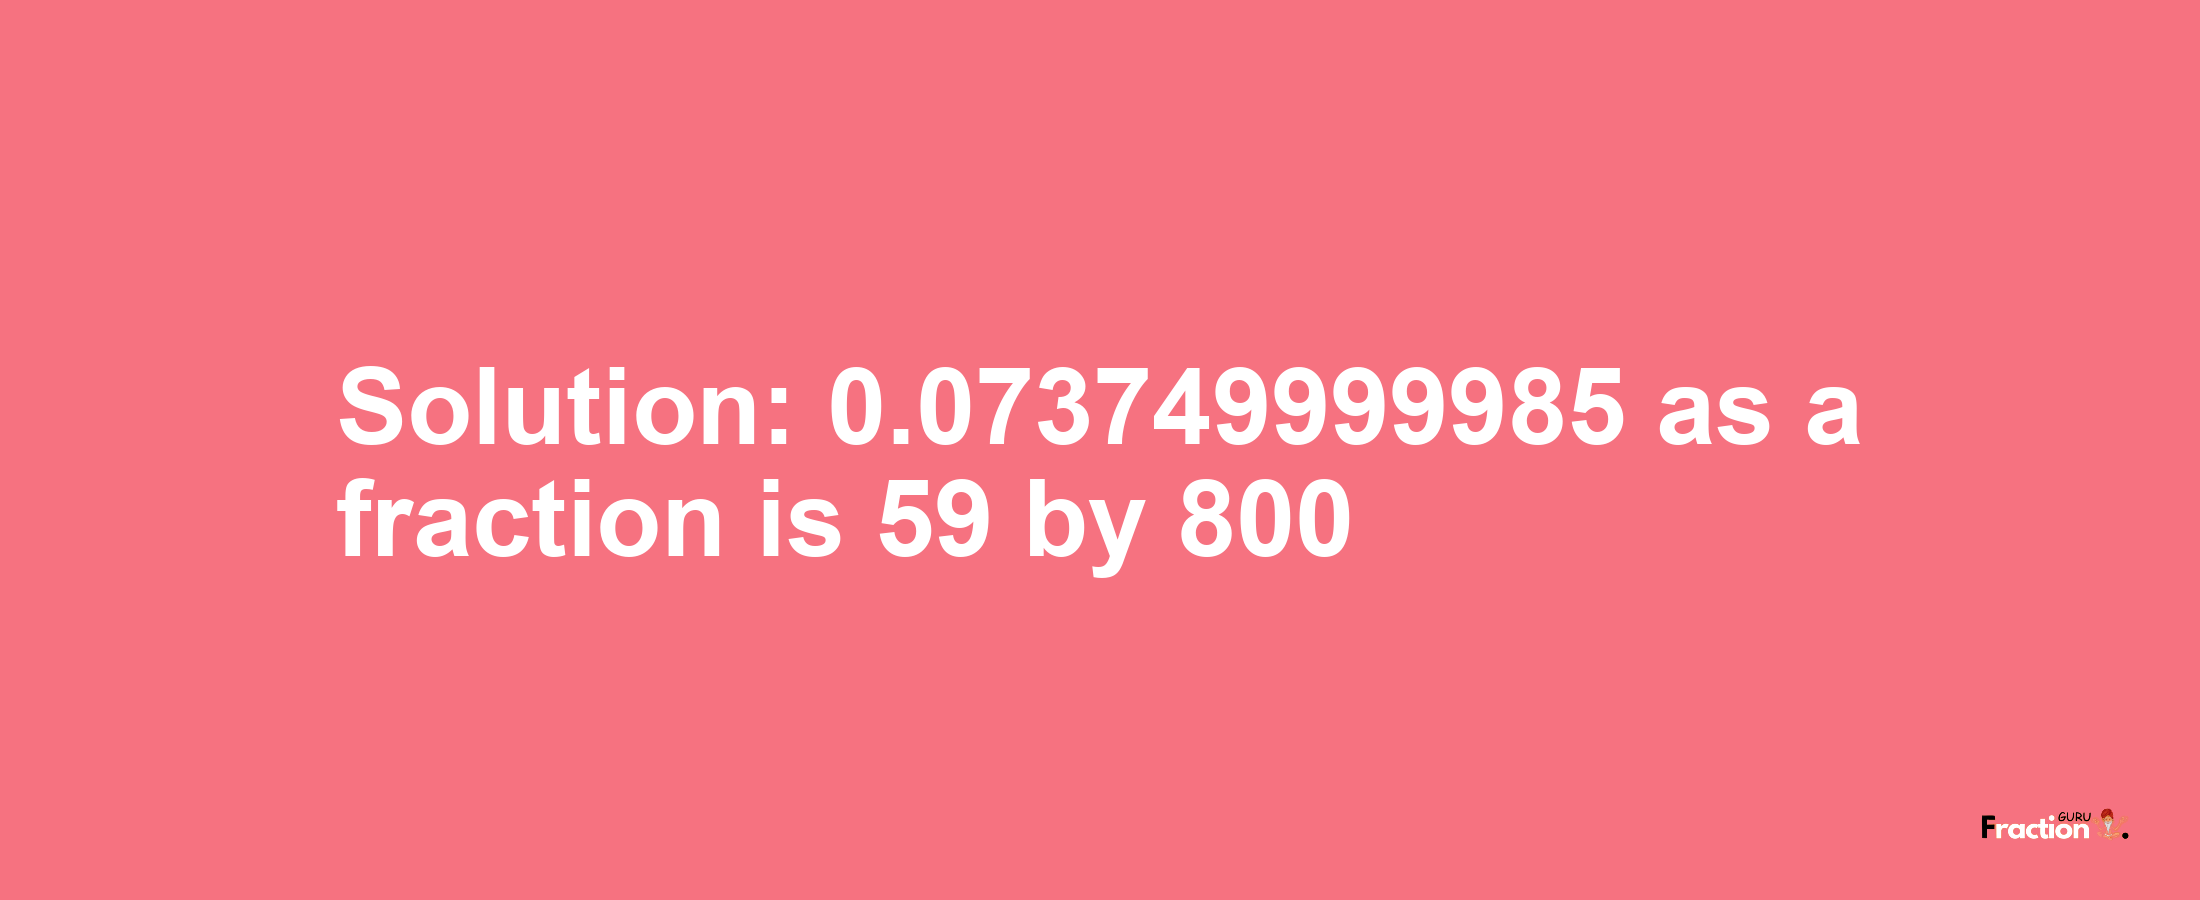 Solution:0.073749999985 as a fraction is 59/800